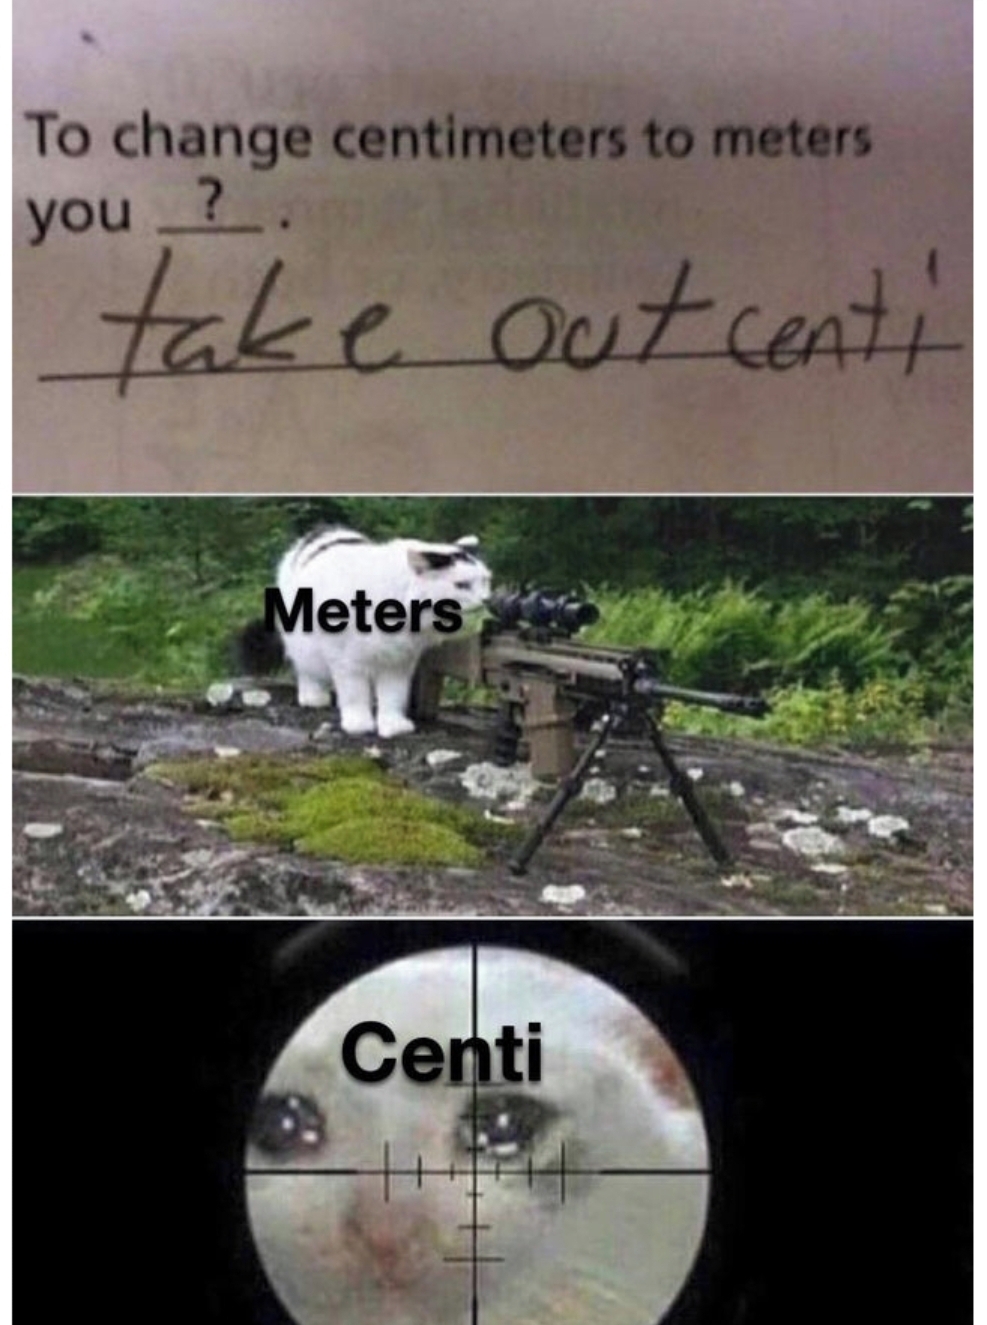 change centimeters to meters you - To change centimeters to meters you ? take out centi Meters Centi